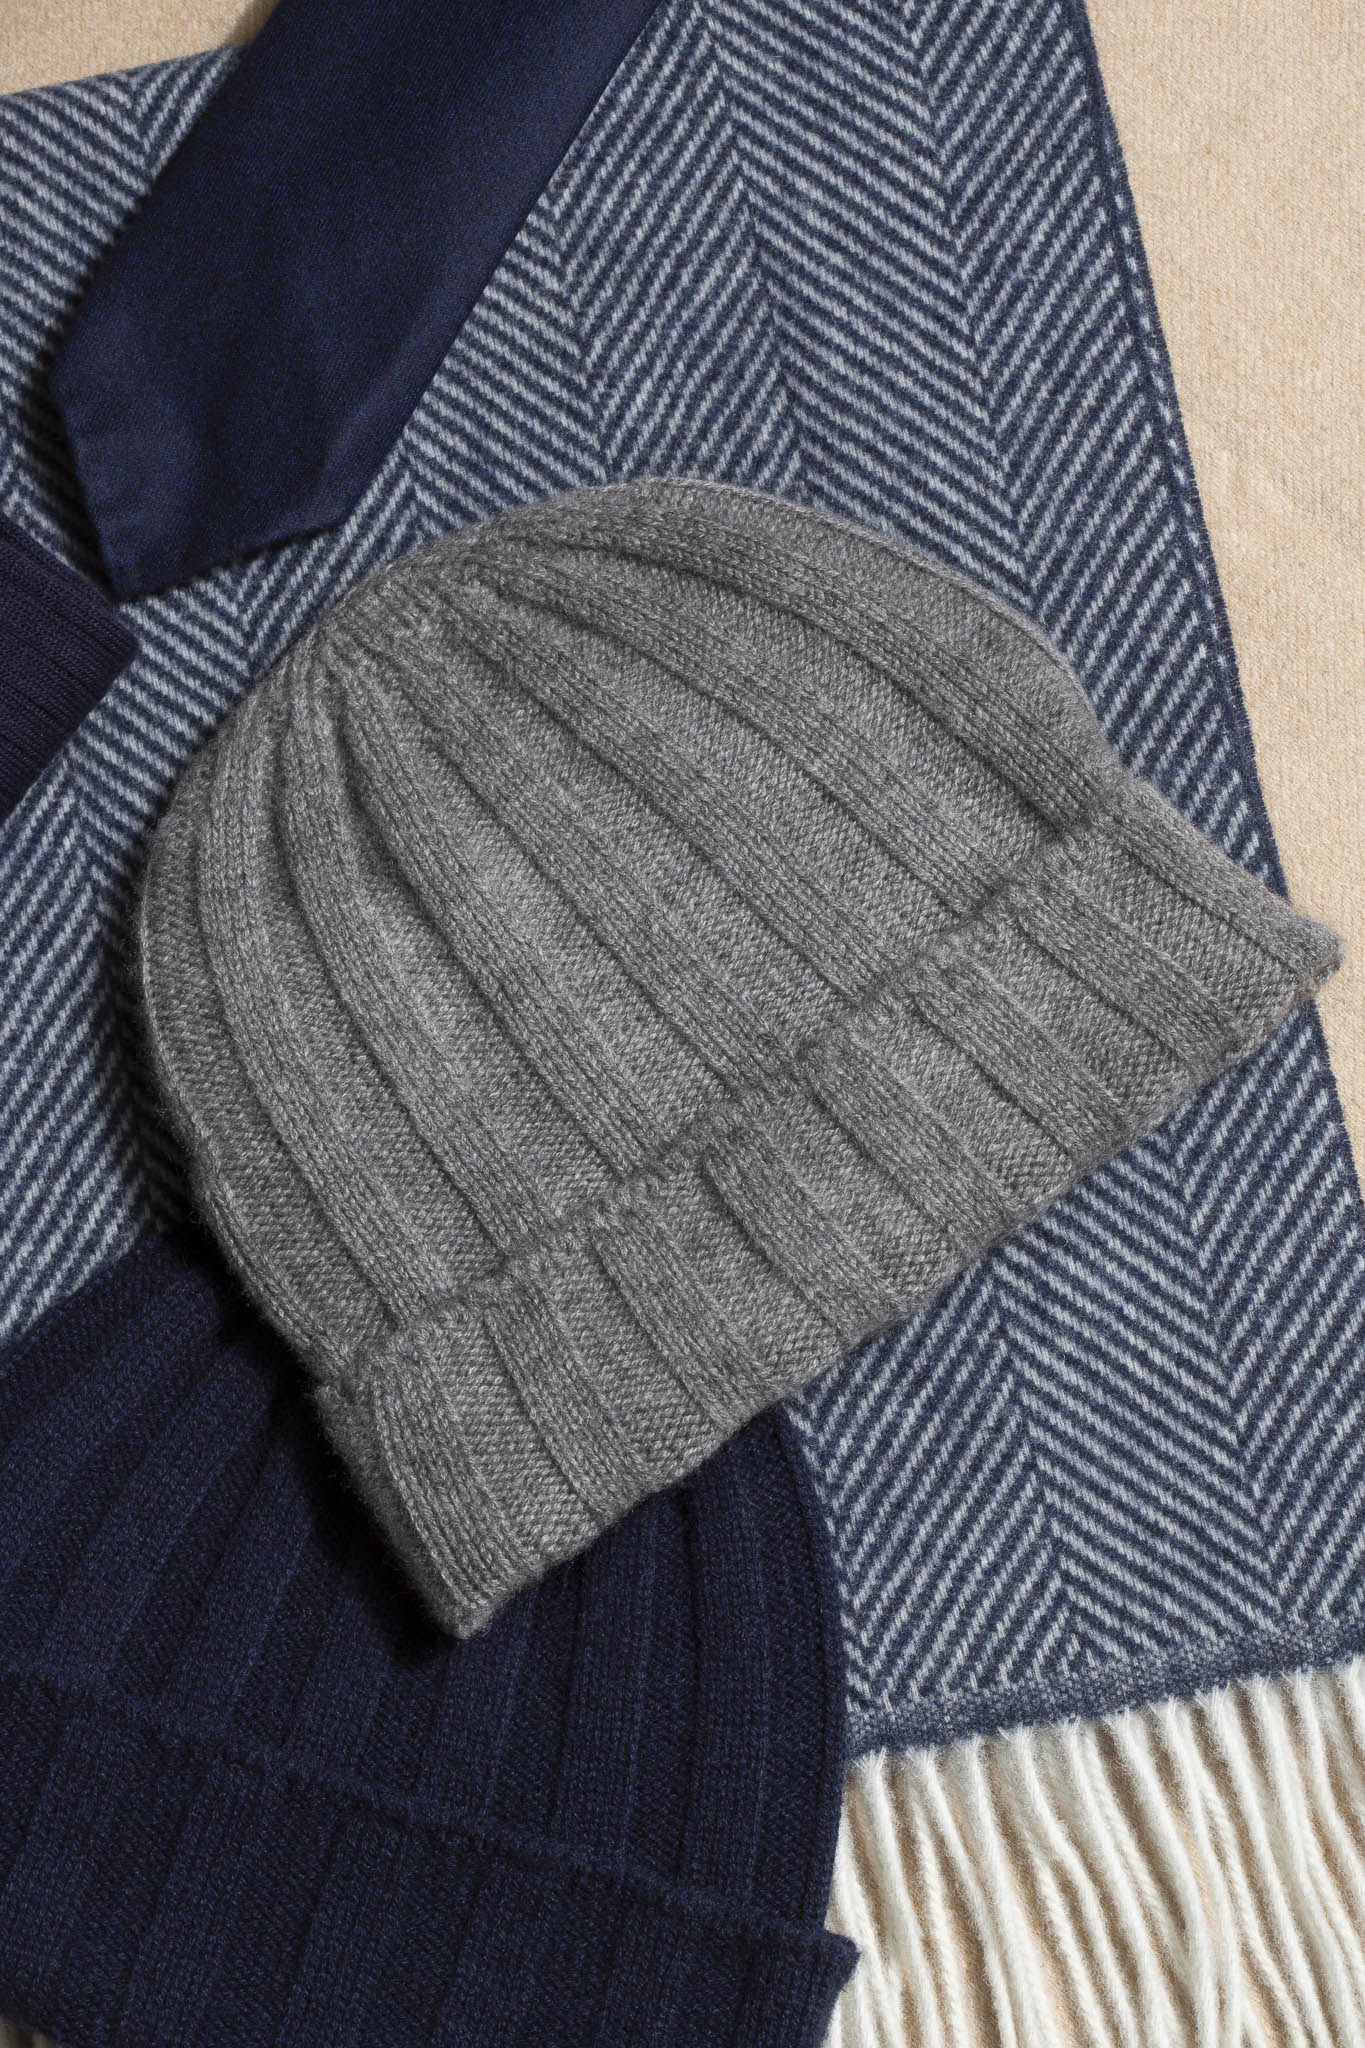 Women’s Pure Cashmere Pom-Pom Hat - Made in Italy - Mélange Grey (20-0073)